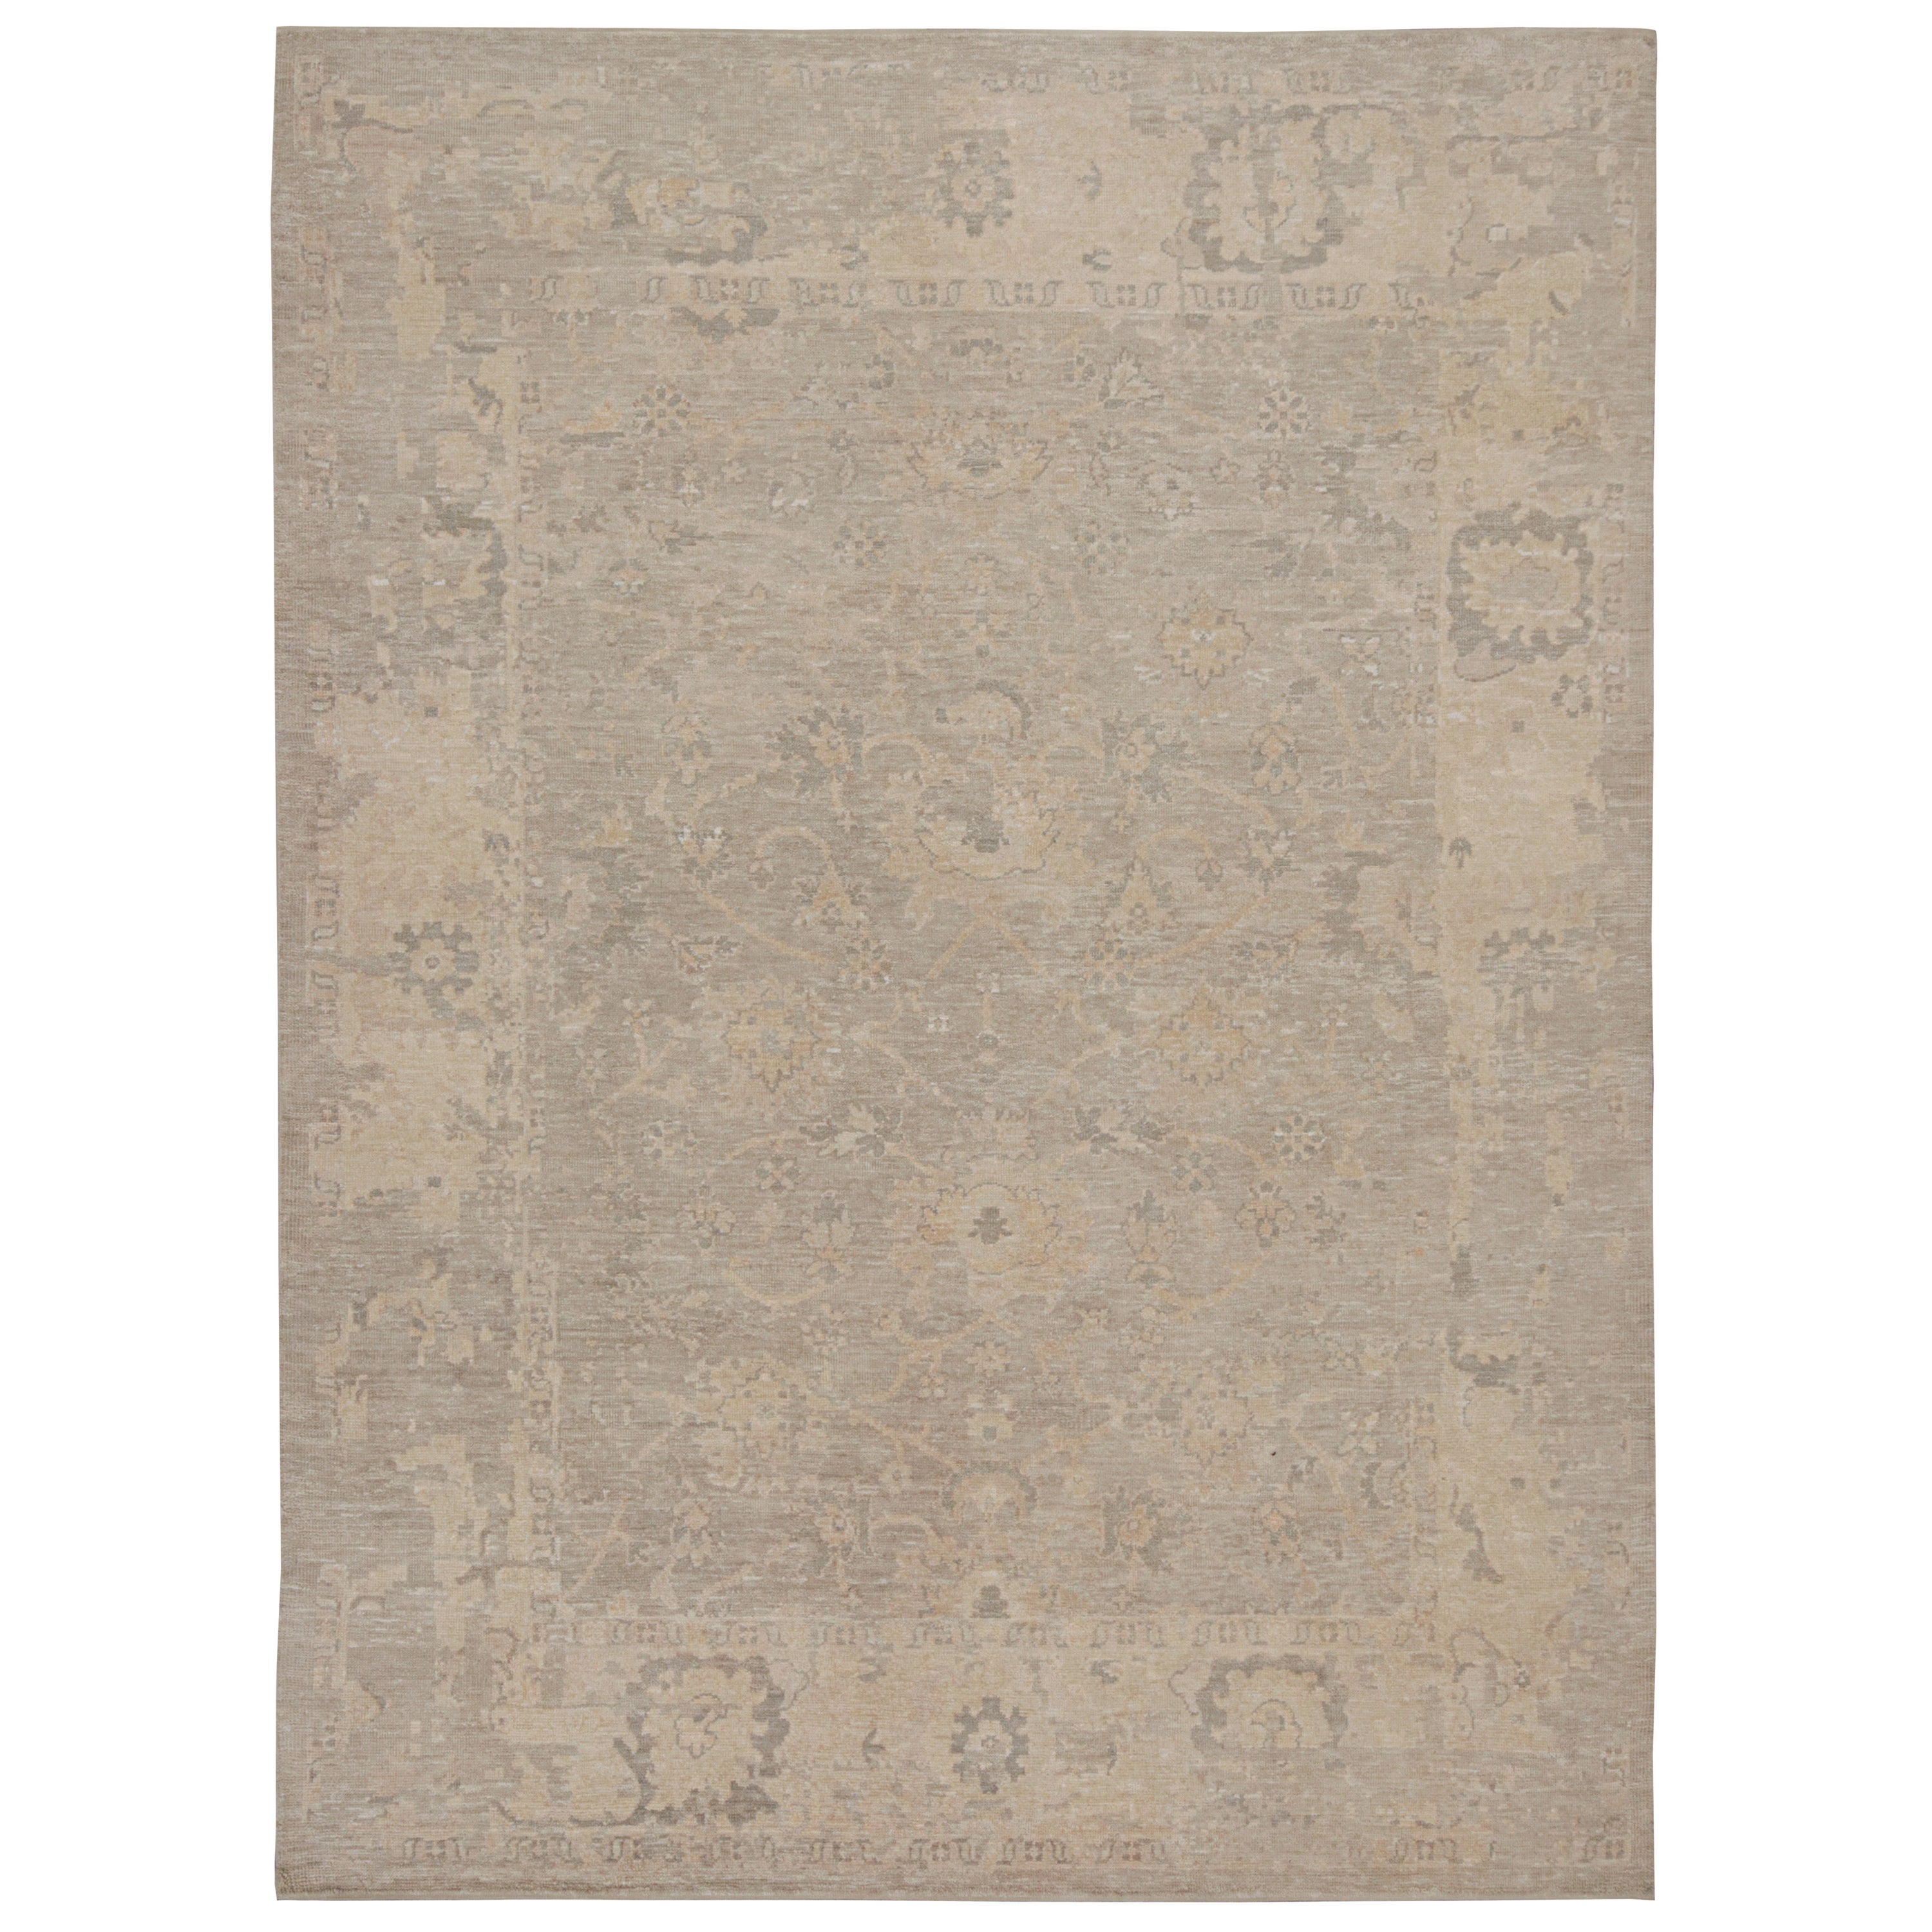 Rug & Kilim’s Oushak Style Rug with Taupe, Beige and Gray Floral Patterns For Sale